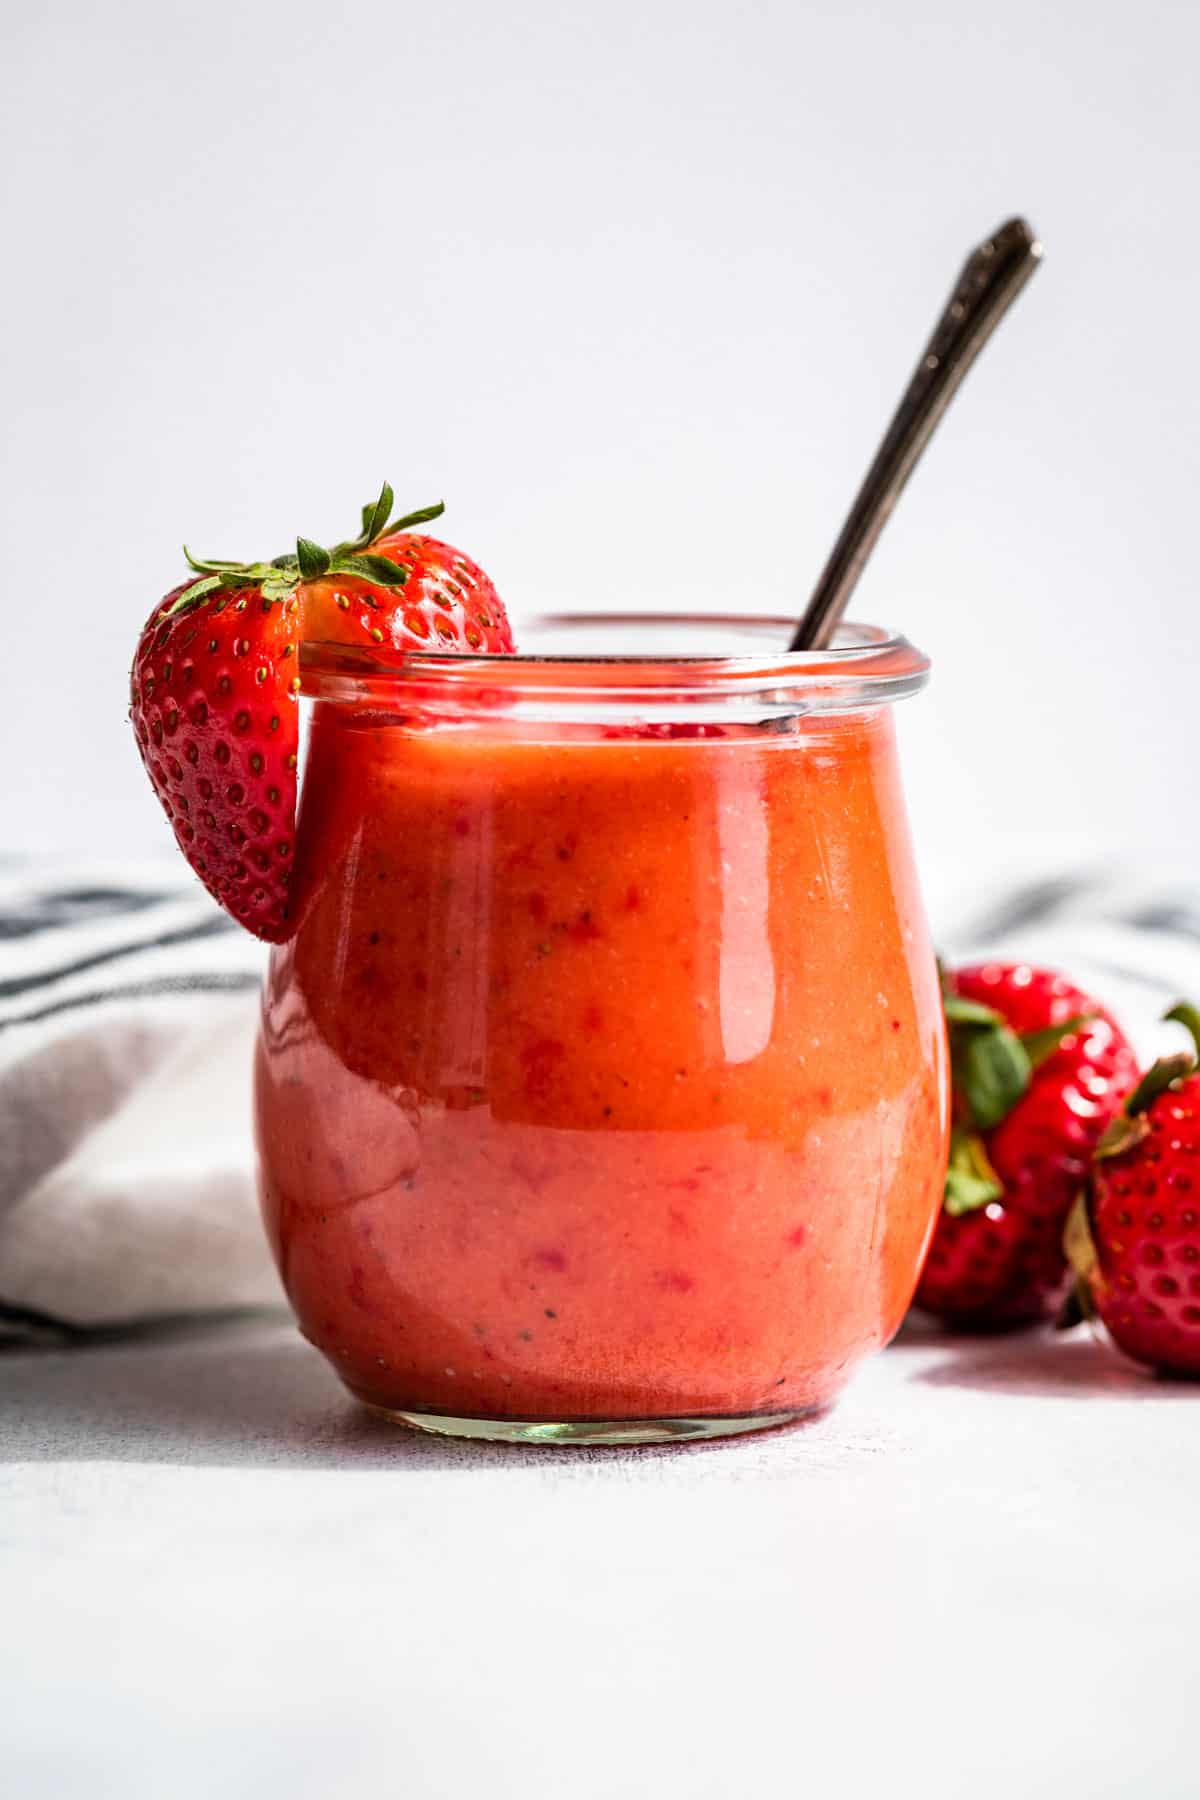 A clear glass jar filled with Strawberry Vinaigrette with a sliced strawberry on the rim.